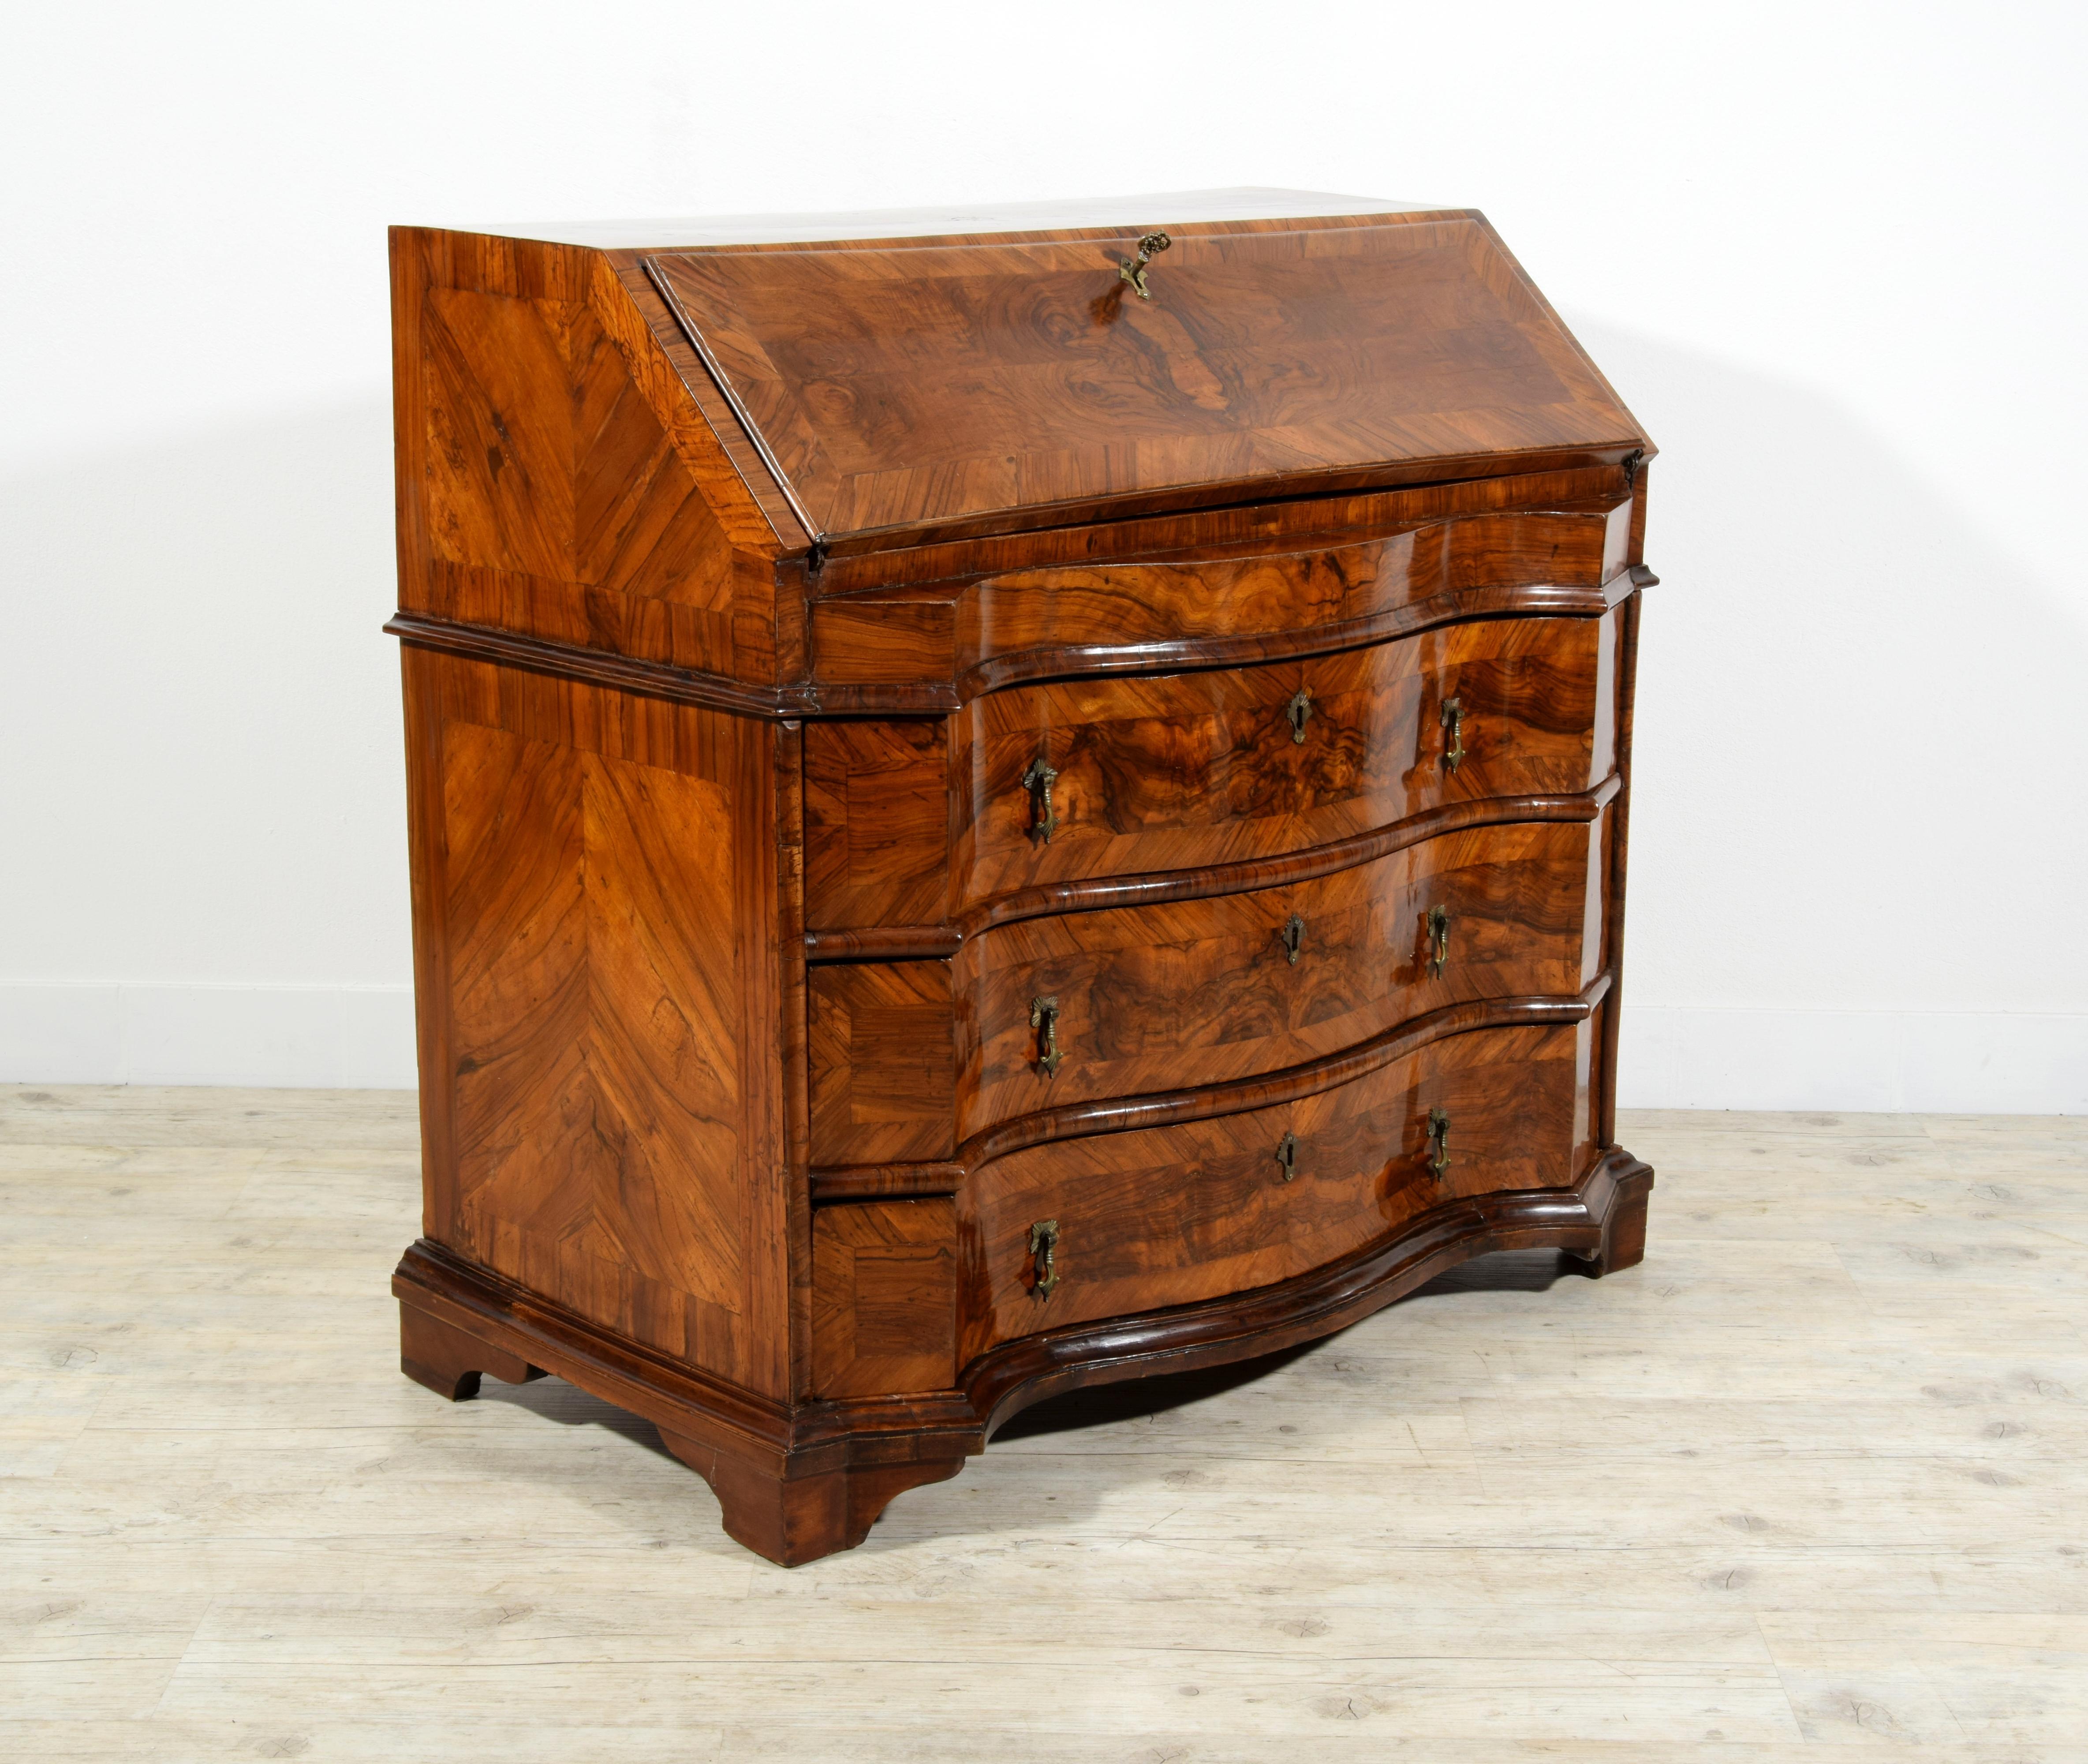 18th century, Italian walnut wood chest of drawers with secrétaire
The elegant small chest of drawers with secrétaire was built in the Venetian area in the first half of the 18th century. The cabinet is paved in walnut wood with walnut veneer